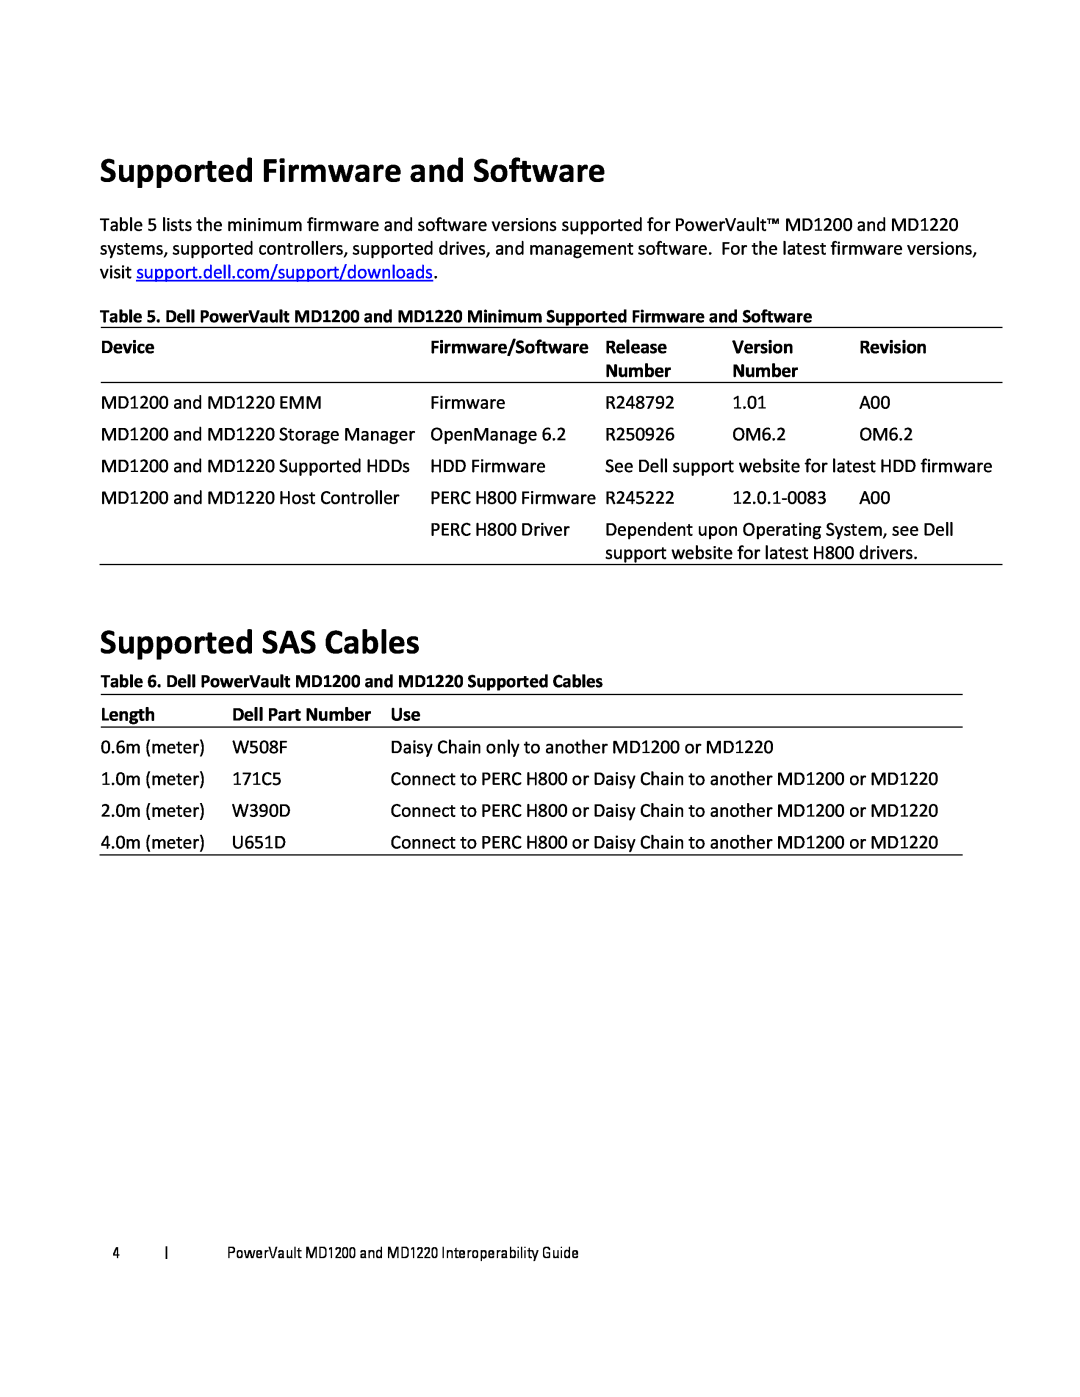 Dell MD1200 Supported Firmware and Software, Supported SAS Cables, Device, Firmware/Software, Release, Version, Revision 